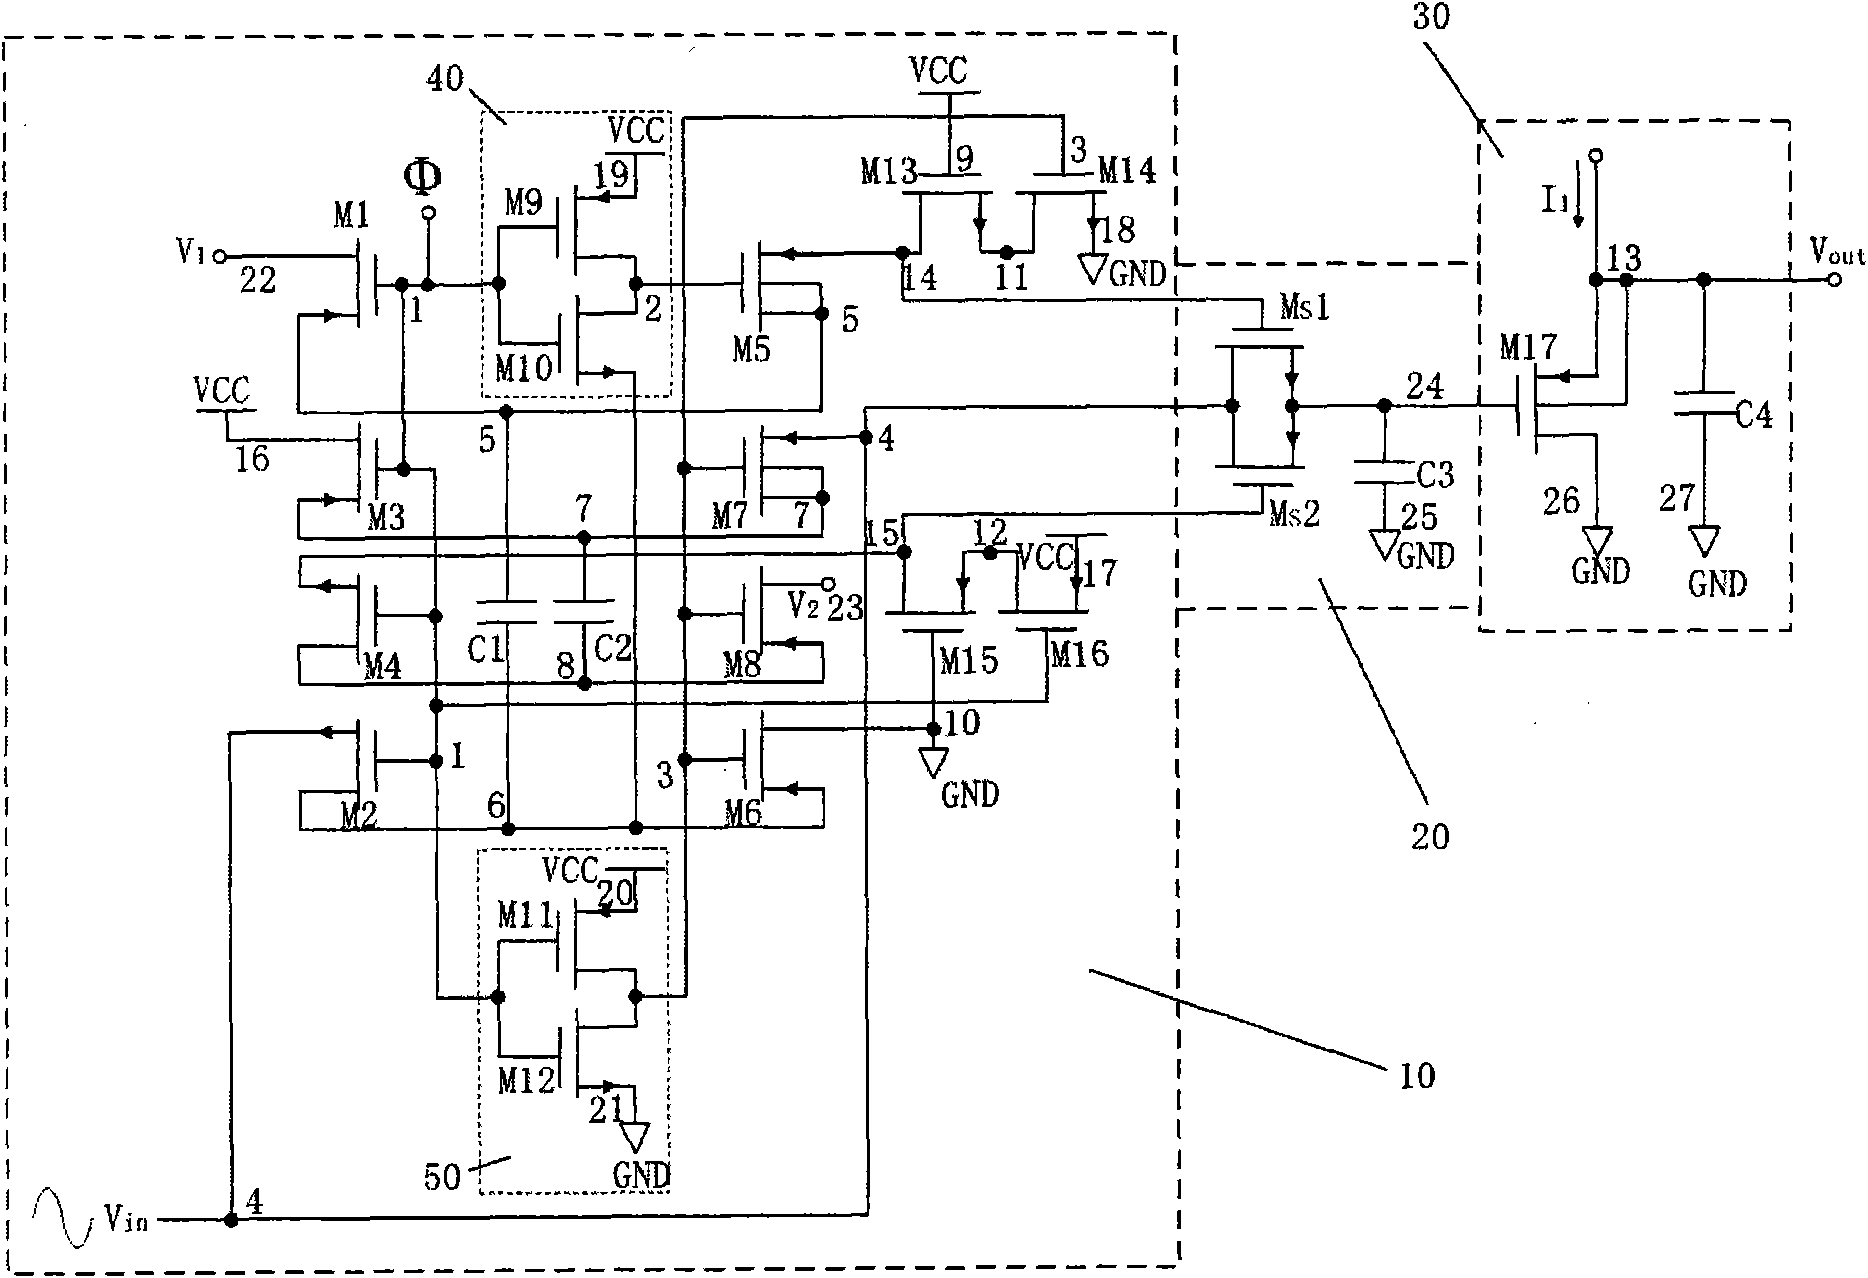 Sampling hold circuit applied to analogue-to-digital converter